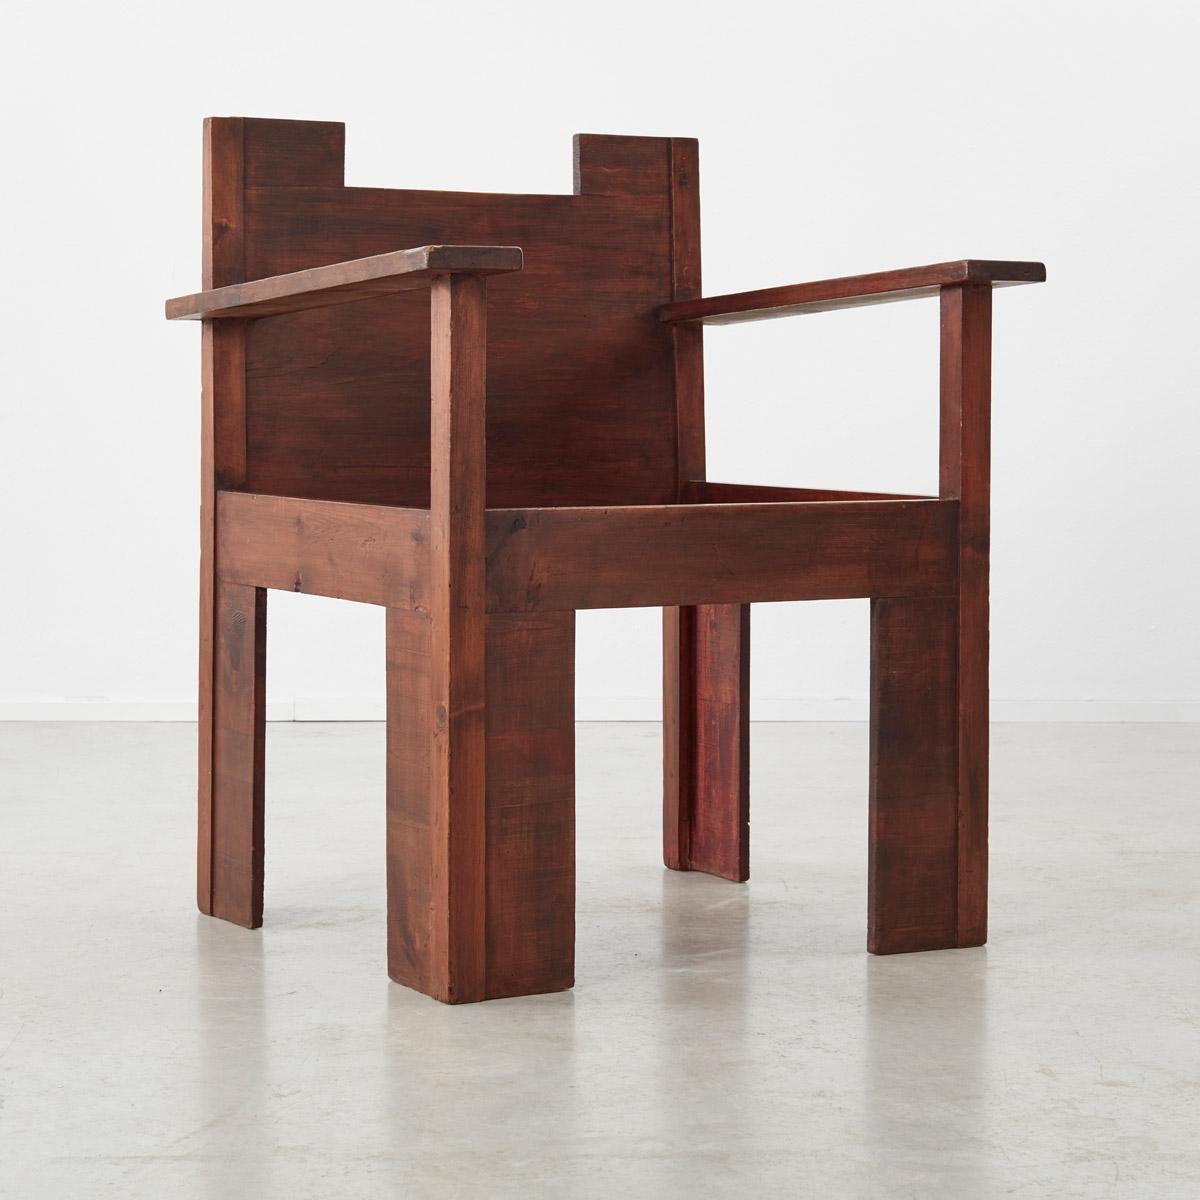 Late 20th Century His and Hers Brutalist Wooden Chairs, circa 1970s